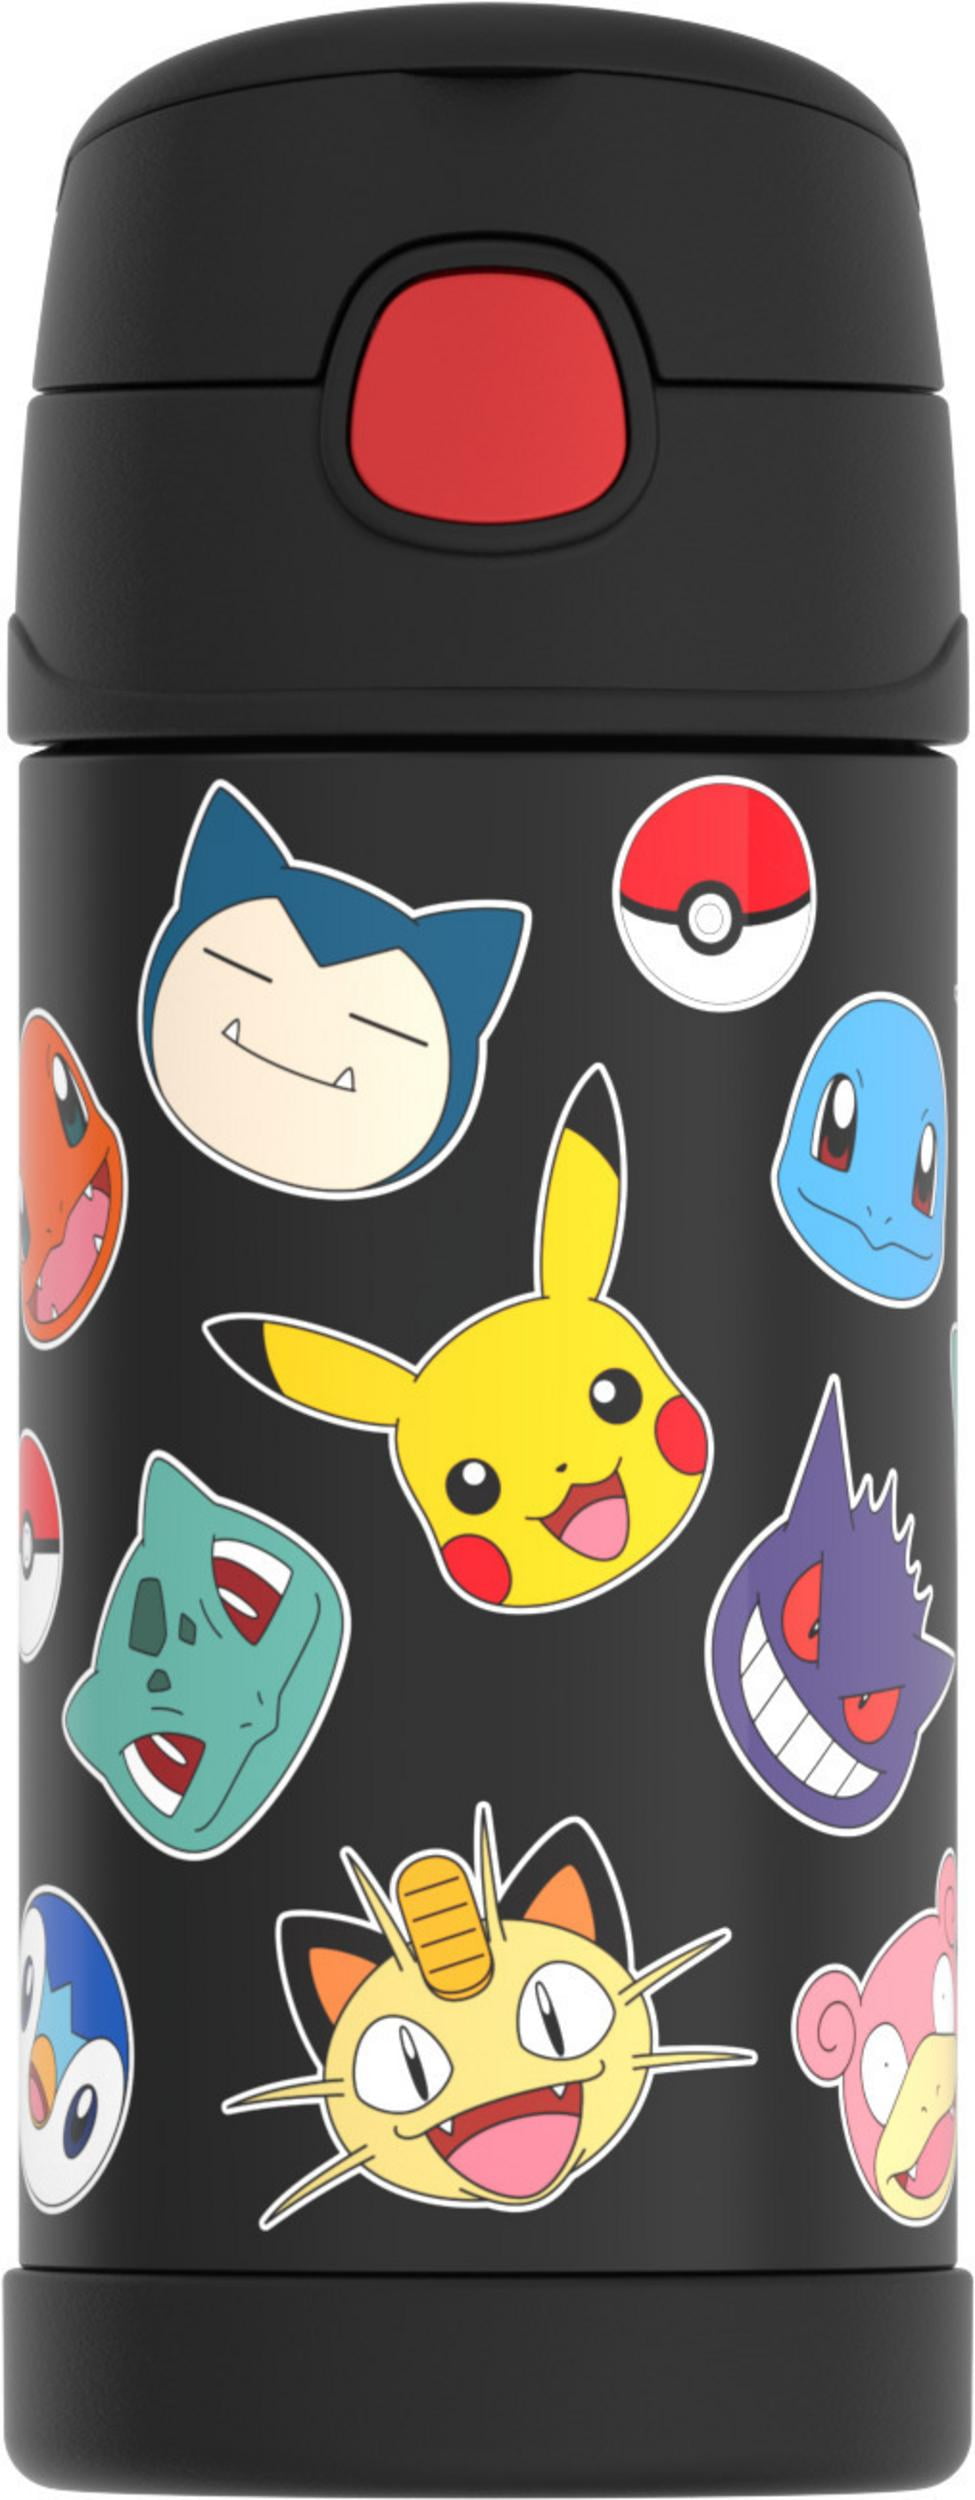 12 Ounce Stainless Steel Vacuum Insulated Kids Straw Bottle, Pokemon -  Sports & Outdoors, Facebook Marketplace